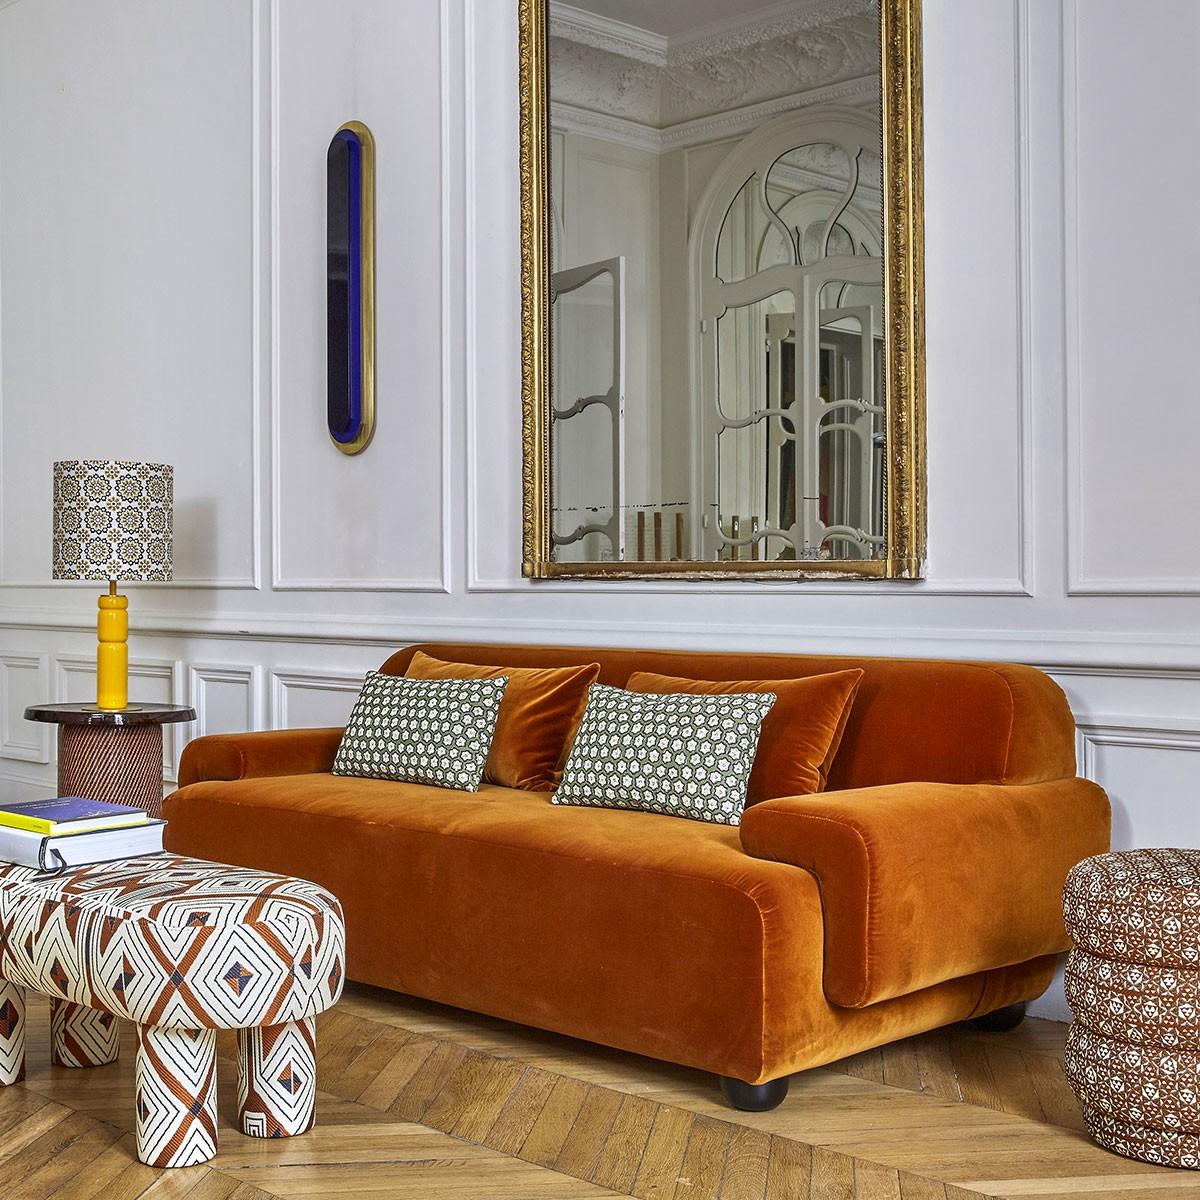 Popus Editions Lena 2.5 seater sofa in amber athena loop yarn upholstery

It looks like it's straight out of a movie, with its generous curves and wide armrests. It is a real invitation to spend long Sundays with the family, comfortably seated in